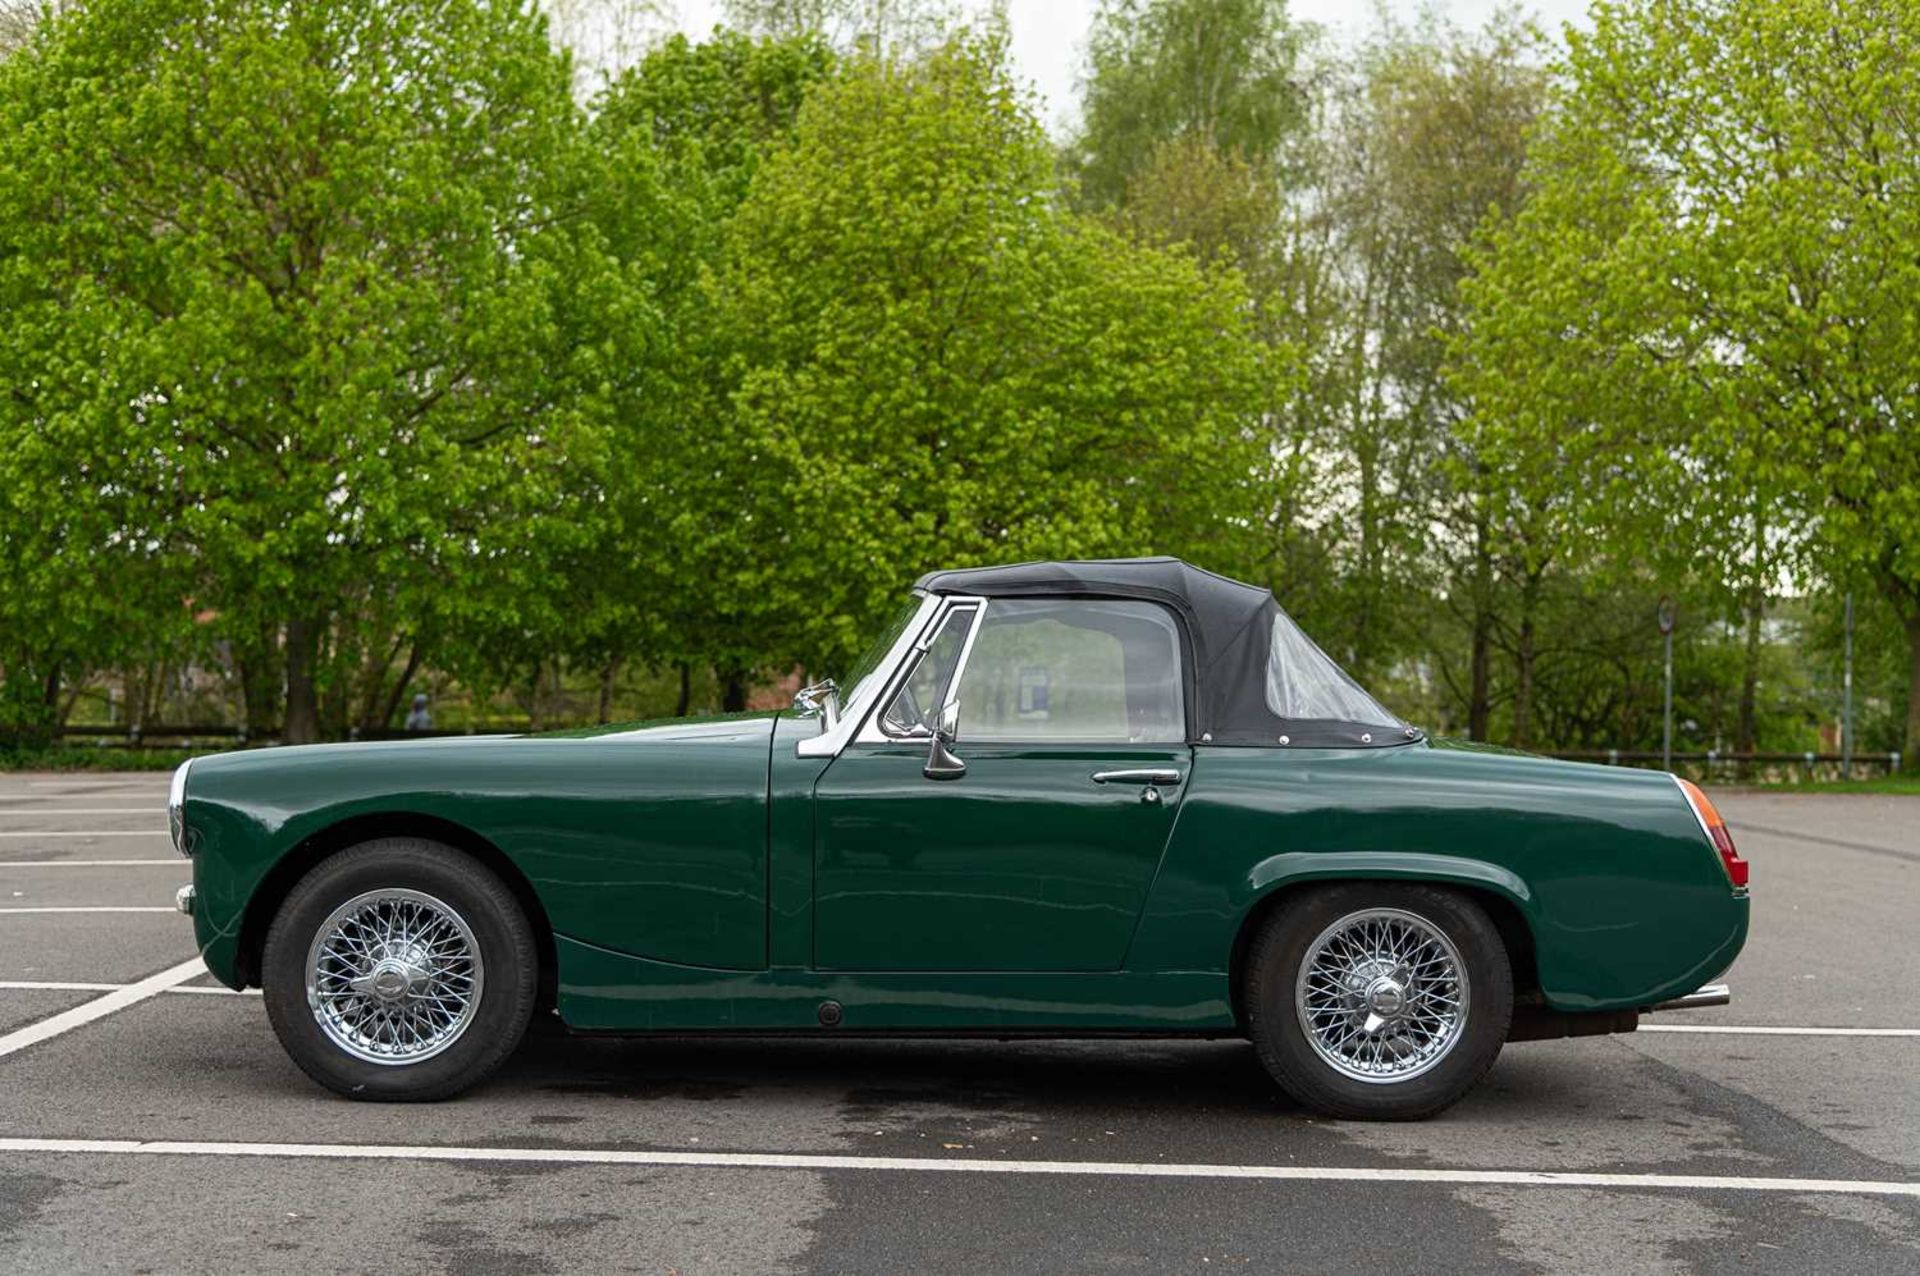 1965 Austin-Healey Sprite Formerly the property of British Formula One racing driver David Piper - Image 7 of 71